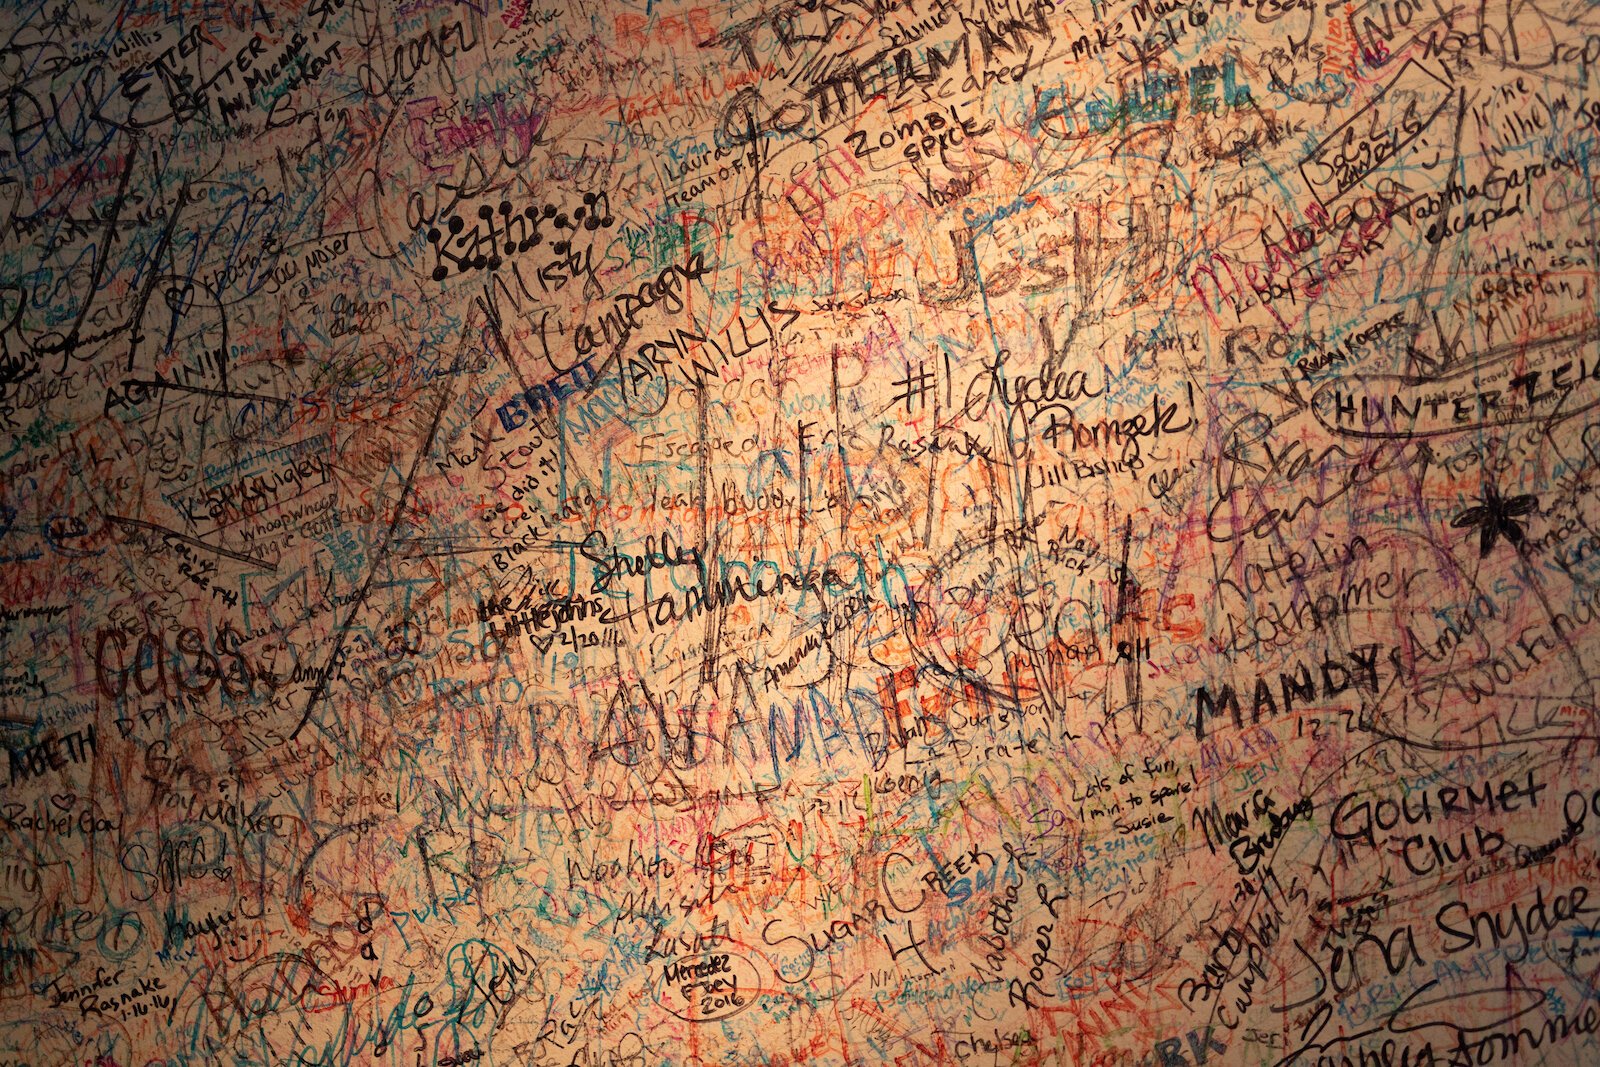 Participant signatures on the wall of the Fort Wayne Escape Room at 327 E. Wayne St., #200.